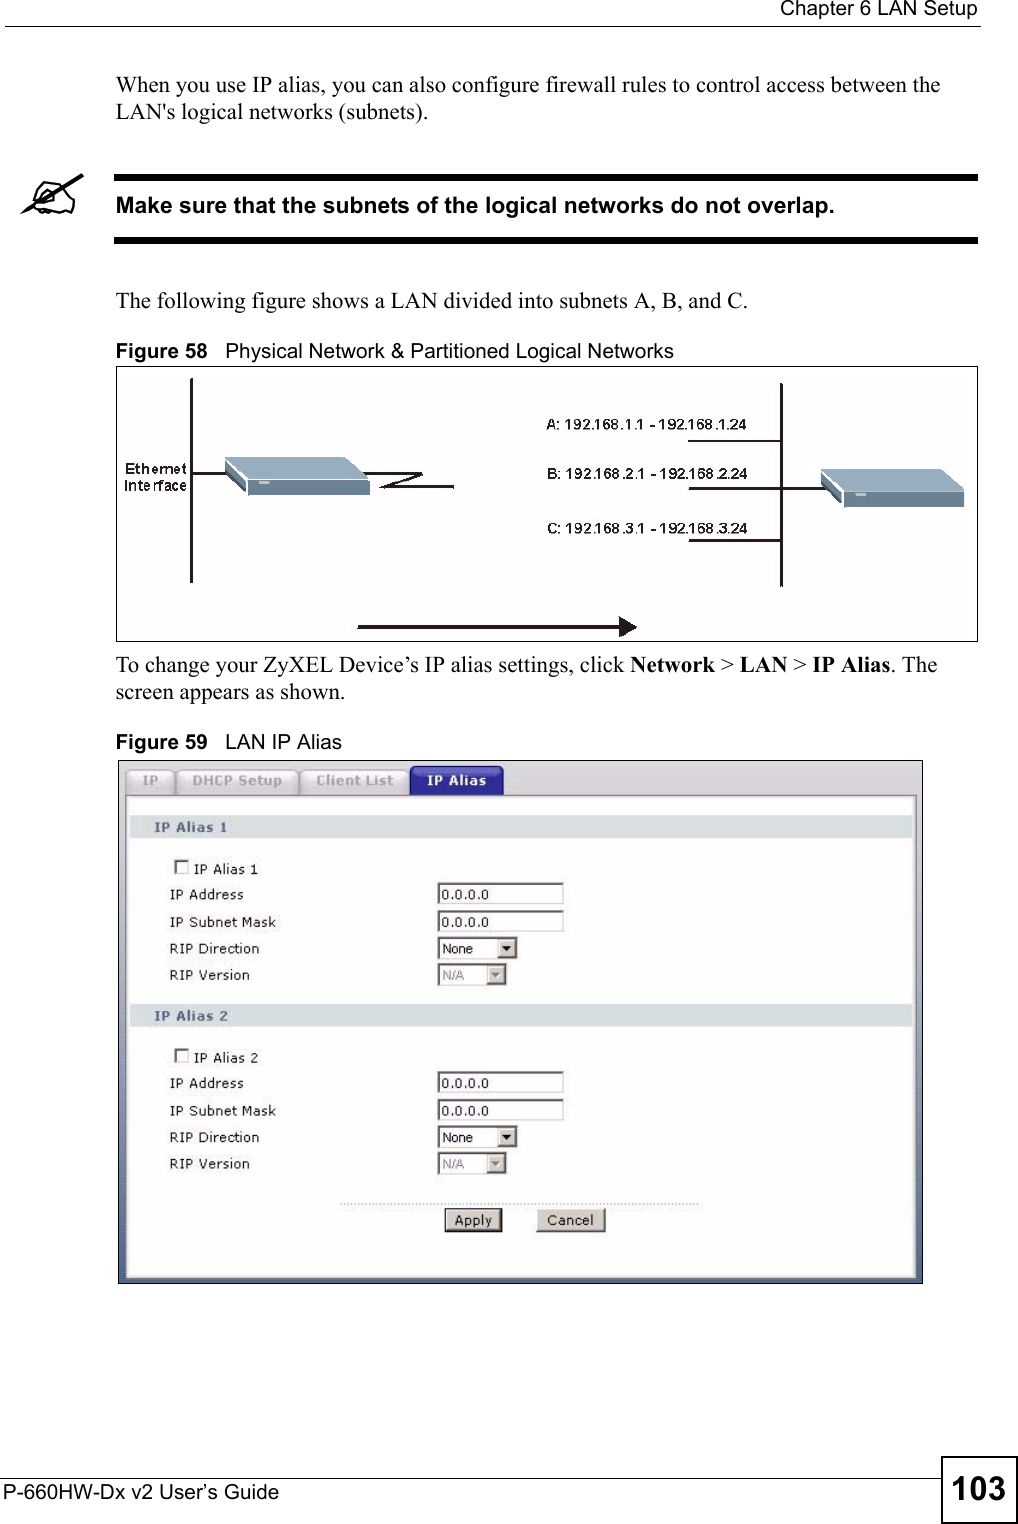  Chapter 6 LAN SetupP-660HW-Dx v2 User’s Guide 103When you use IP alias, you can also configure firewall rules to control access between the LAN&apos;s logical networks (subnets).&quot;Make sure that the subnets of the logical networks do not overlap.The following figure shows a LAN divided into subnets A, B, and C.Figure 58   Physical Network &amp; Partitioned Logical NetworksTo change your ZyXEL Device’s IP alias settings, click Network &gt; LAN &gt; IP Alias. The screen appears as shown.Figure 59   LAN IP Alias